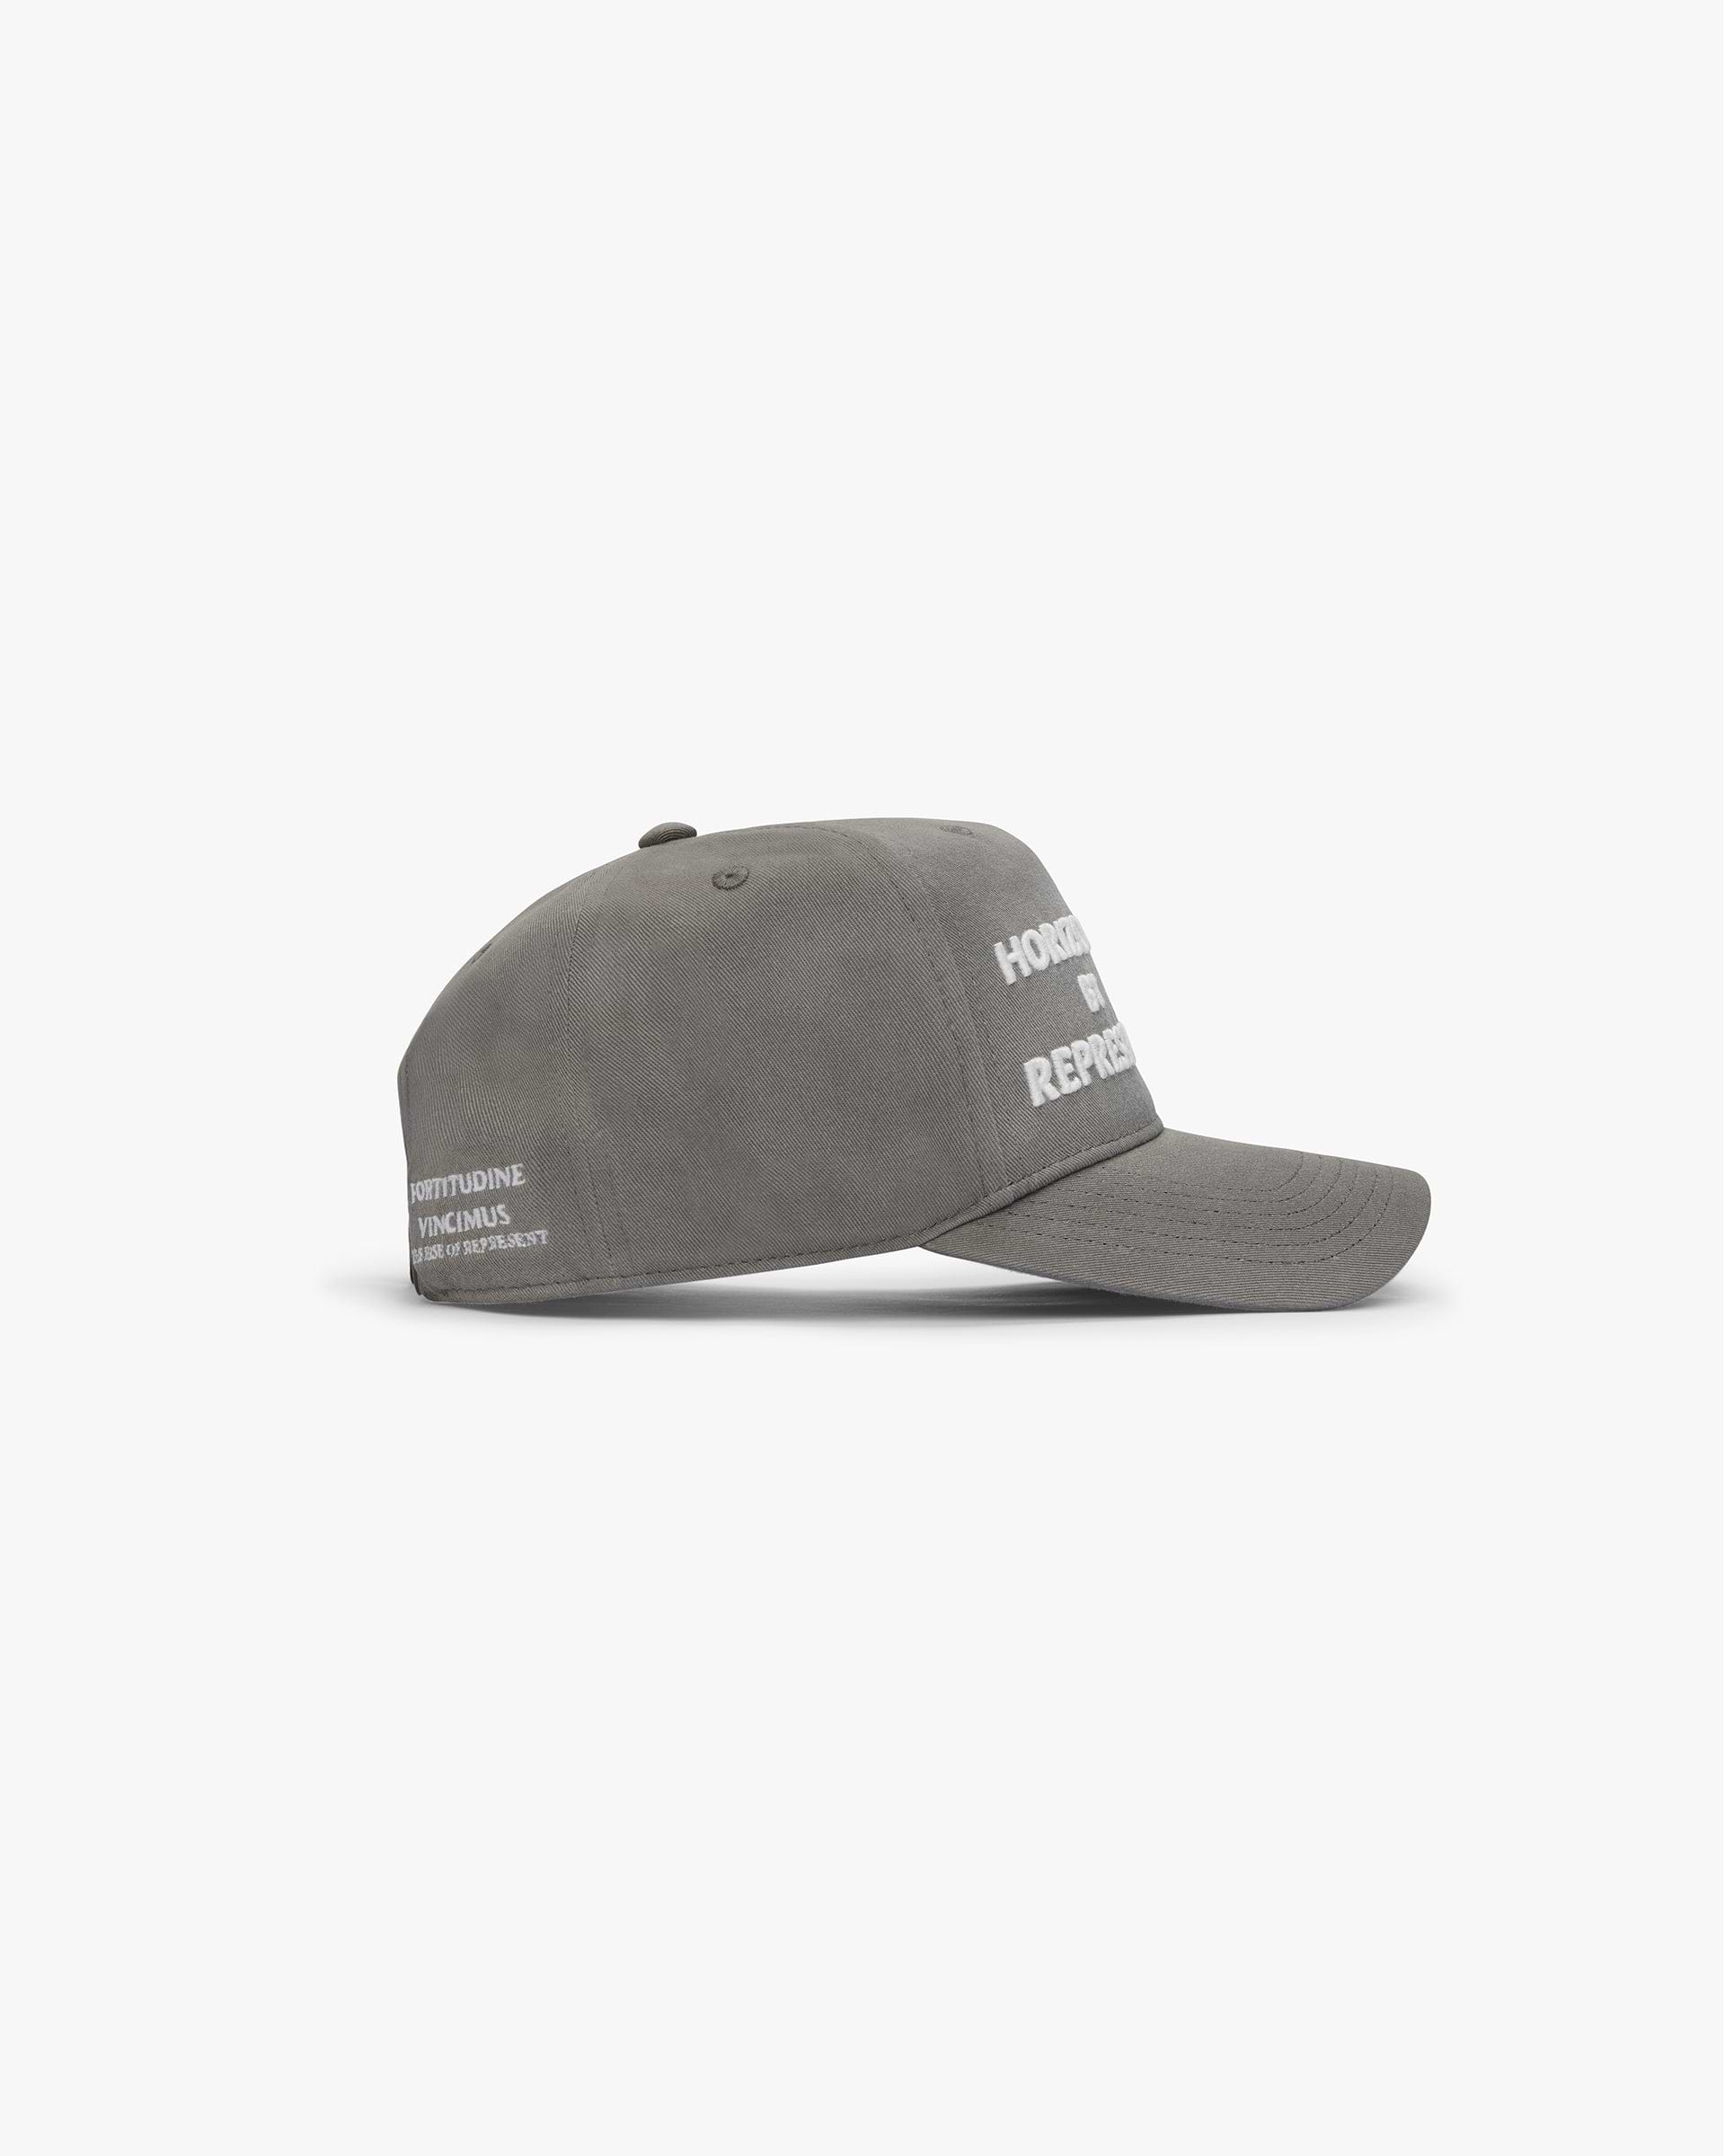 Horizons Cap - Washed Taupe